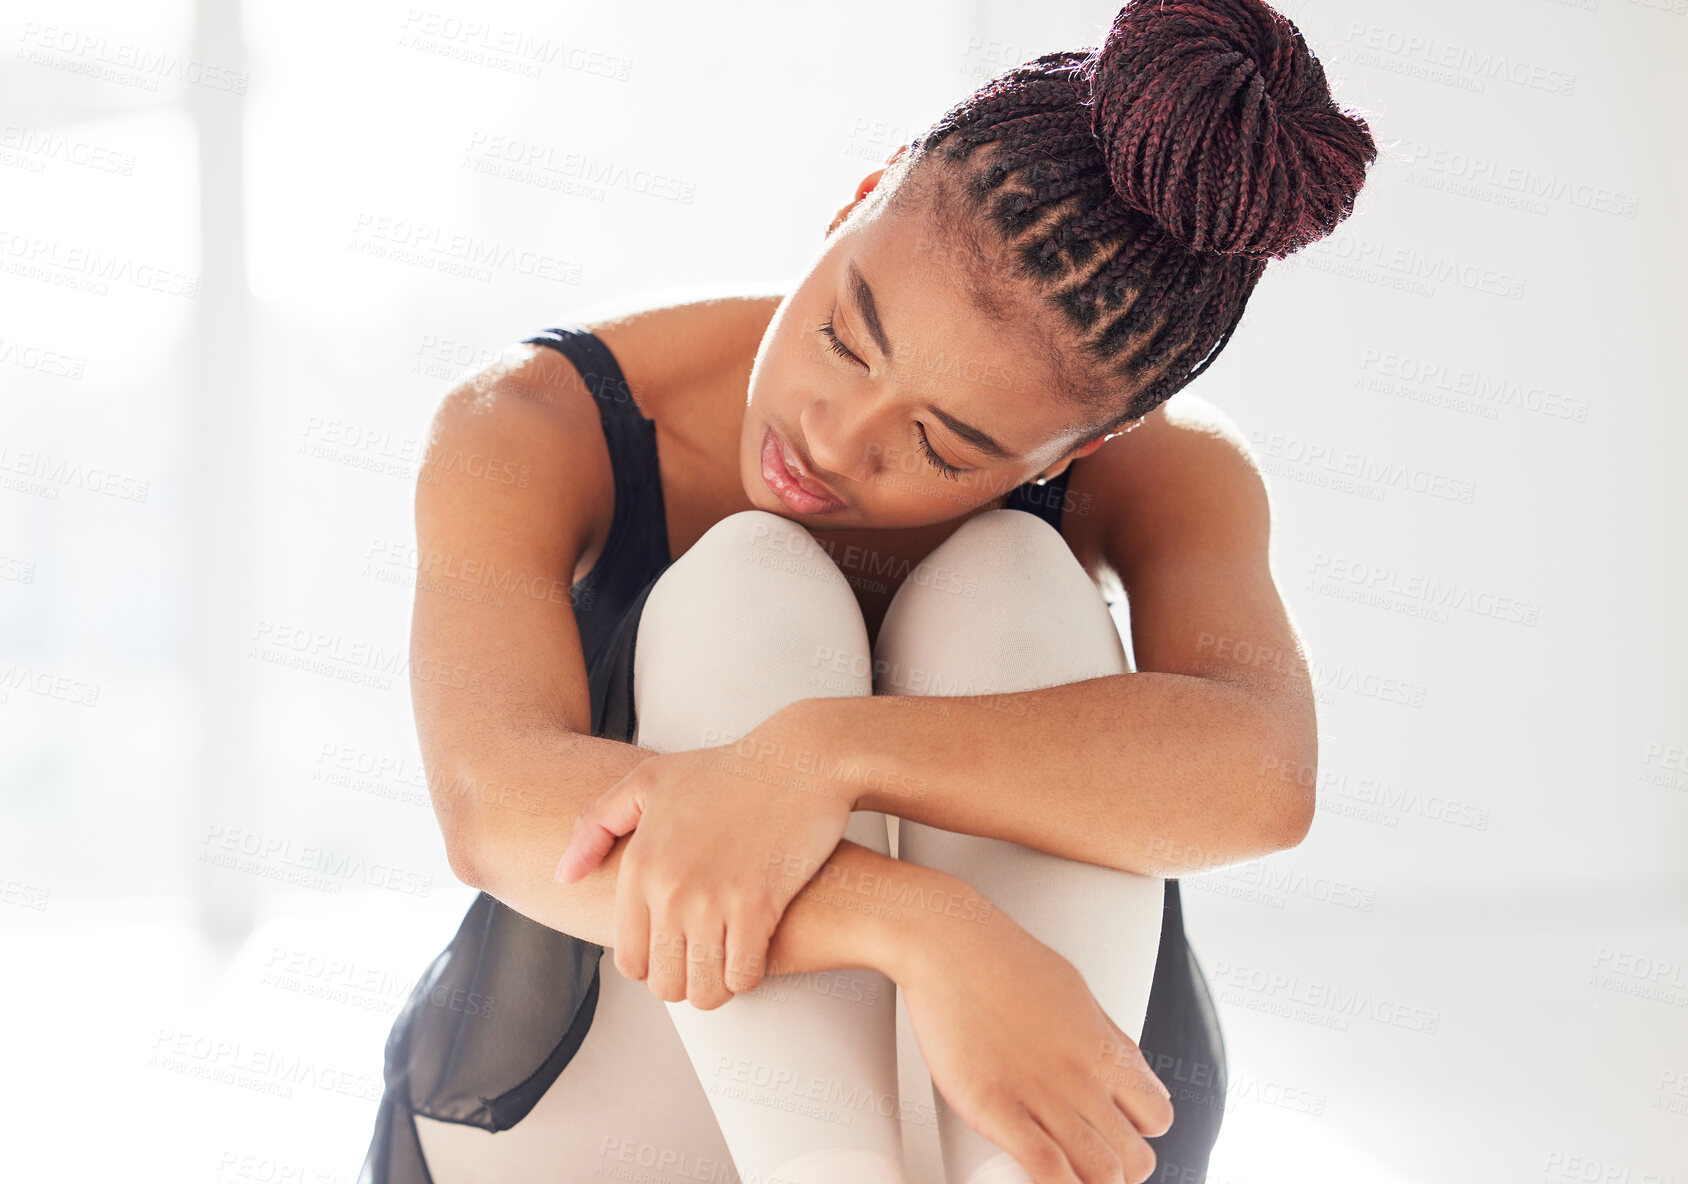 Buy stock photo Shot of a ballerina looking sad while sitting in her dance studio